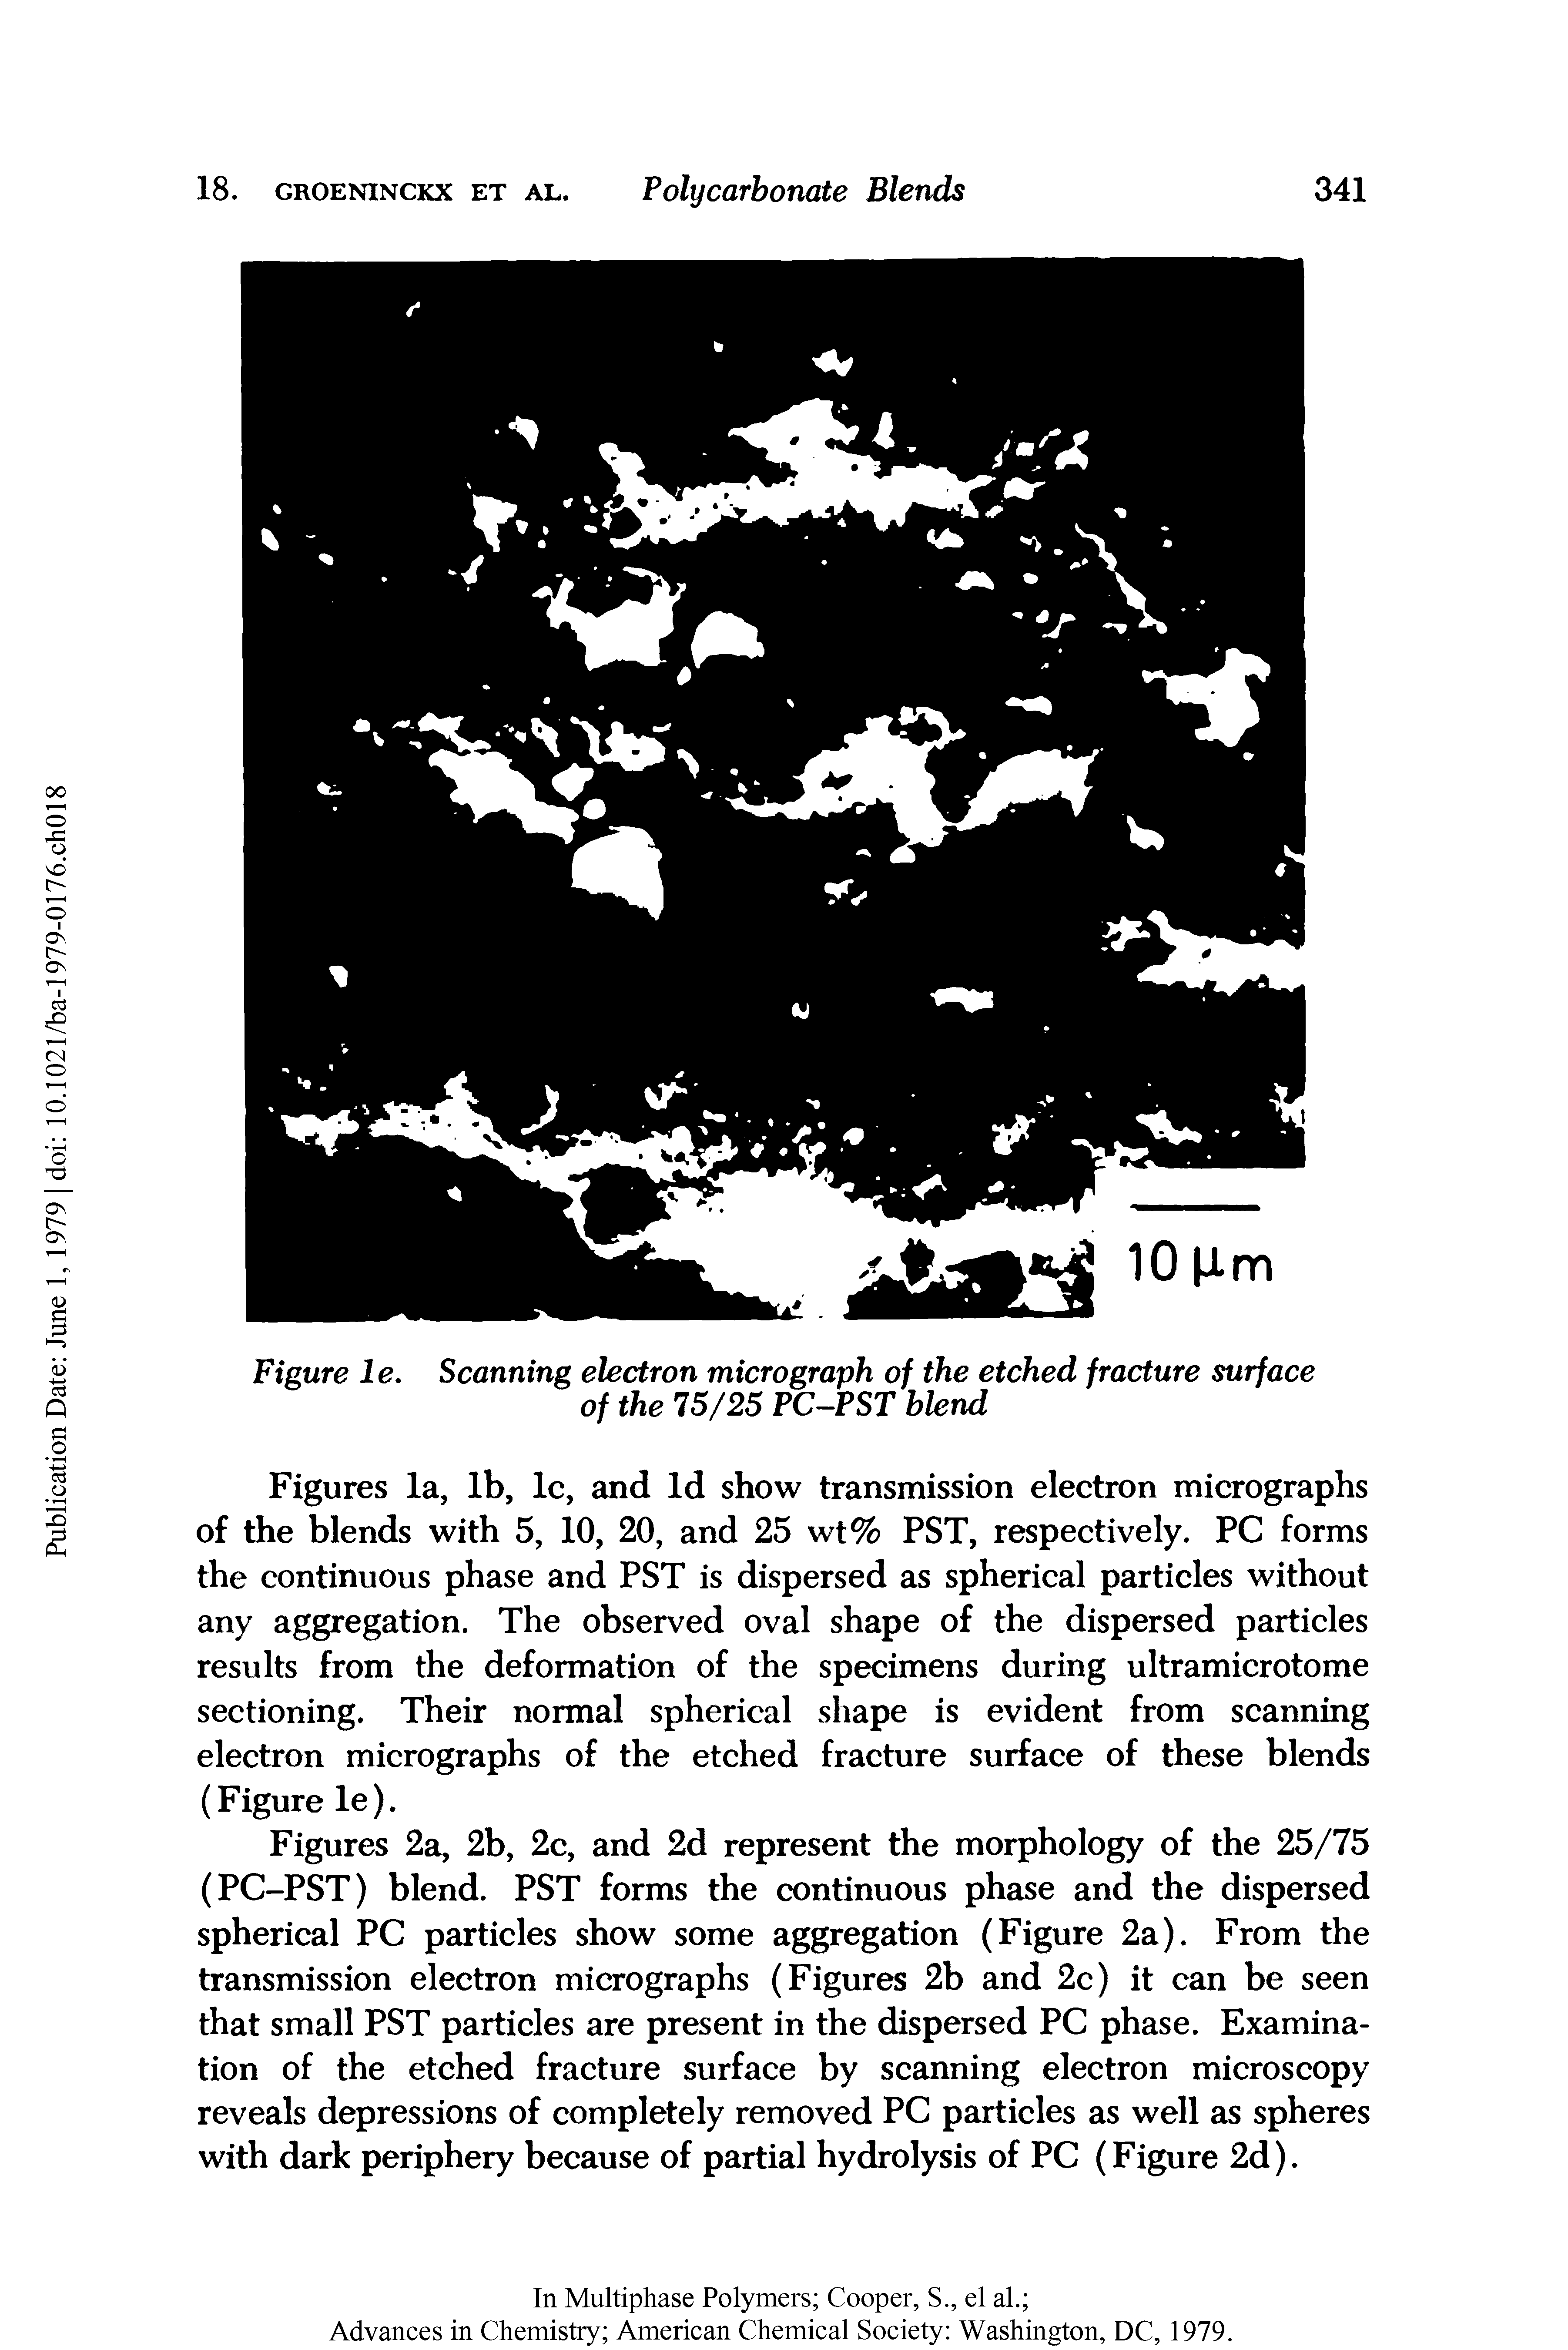 Figures la, lb, lc, and Id show transmission electron micrographs of the blends with 5, 10, 20, and 25 wt% PST, respectively. PC forms the continuous phase and PST is dispersed as spherical particles without any aggregation. The observed oval shape of the dispersed particles results from the deformation of the specimens during ultramicrotome sectioning. Their normal spherical shape is evident from scanning electron micrographs of the etched fracture surface of these blends (Figure le).